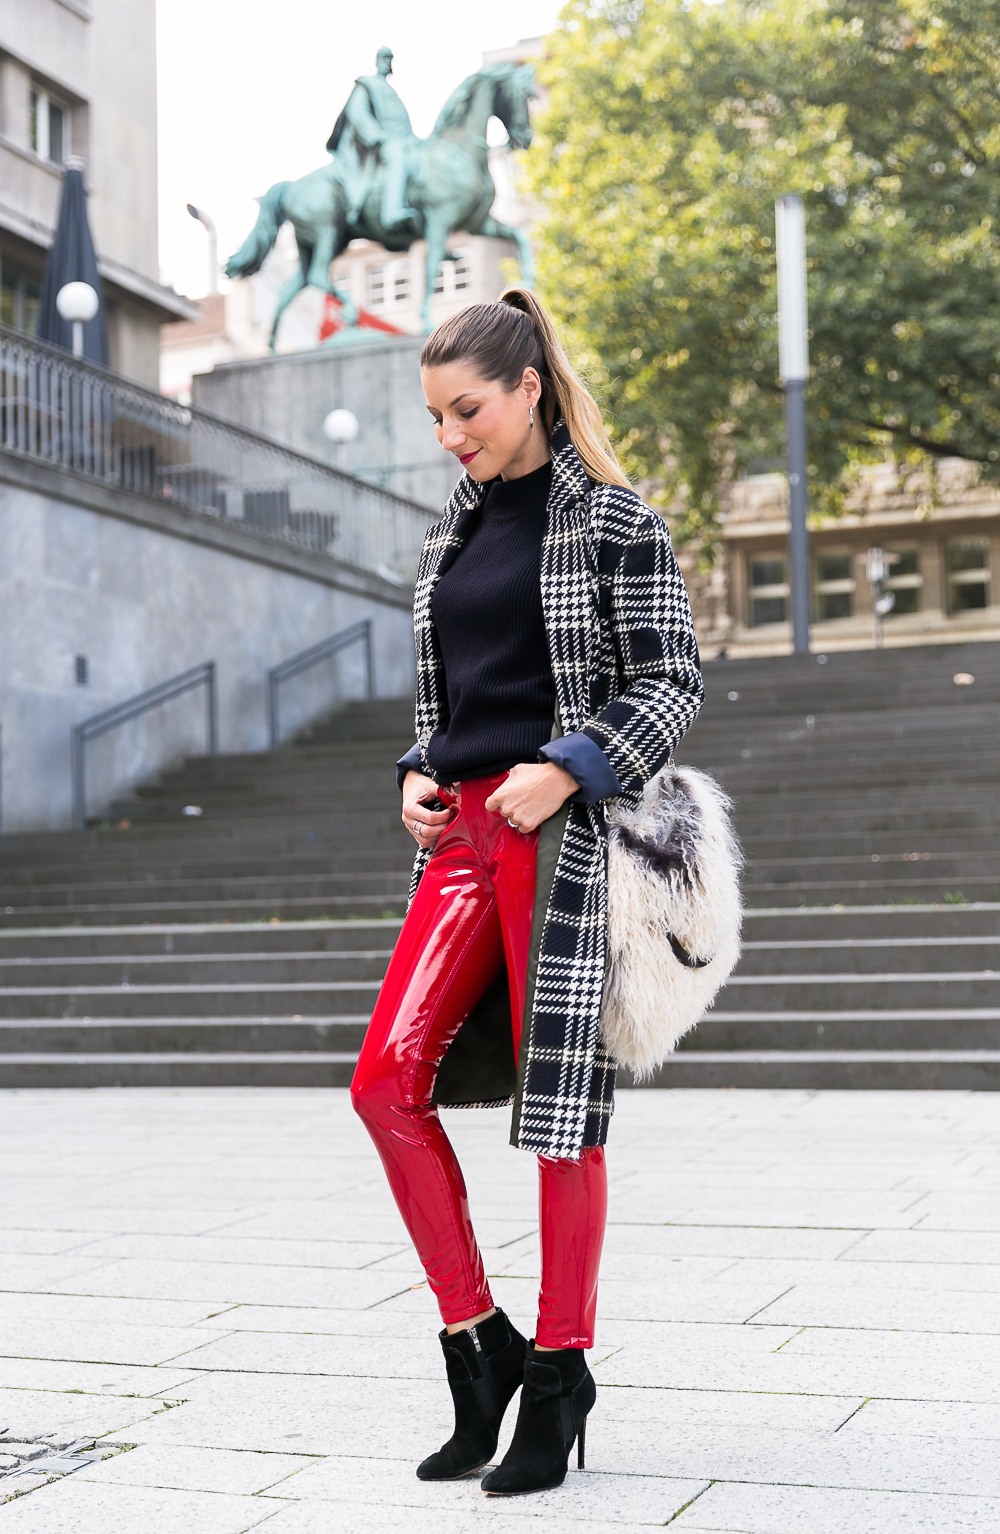 lackhose glencheck mantel street style fashion trends 2017 herbst outfit felltasche hose rot